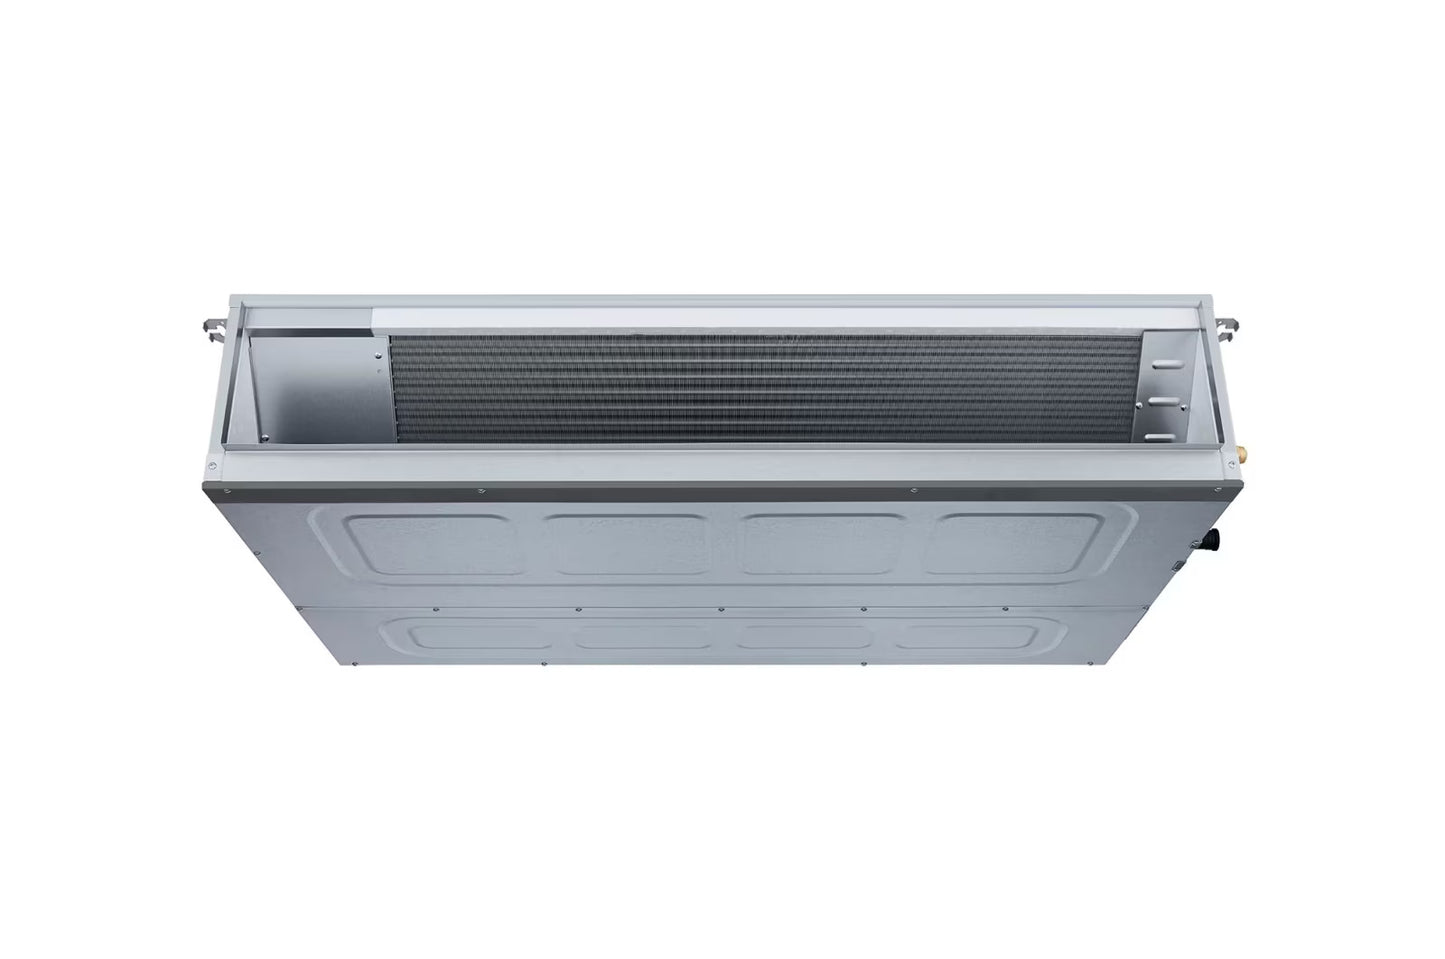 LG Ceiling Concealed Duct INV Unit 2.2KW with High Static and E.S.P. Control for Multiple Rooms - ARNU07GBHA2